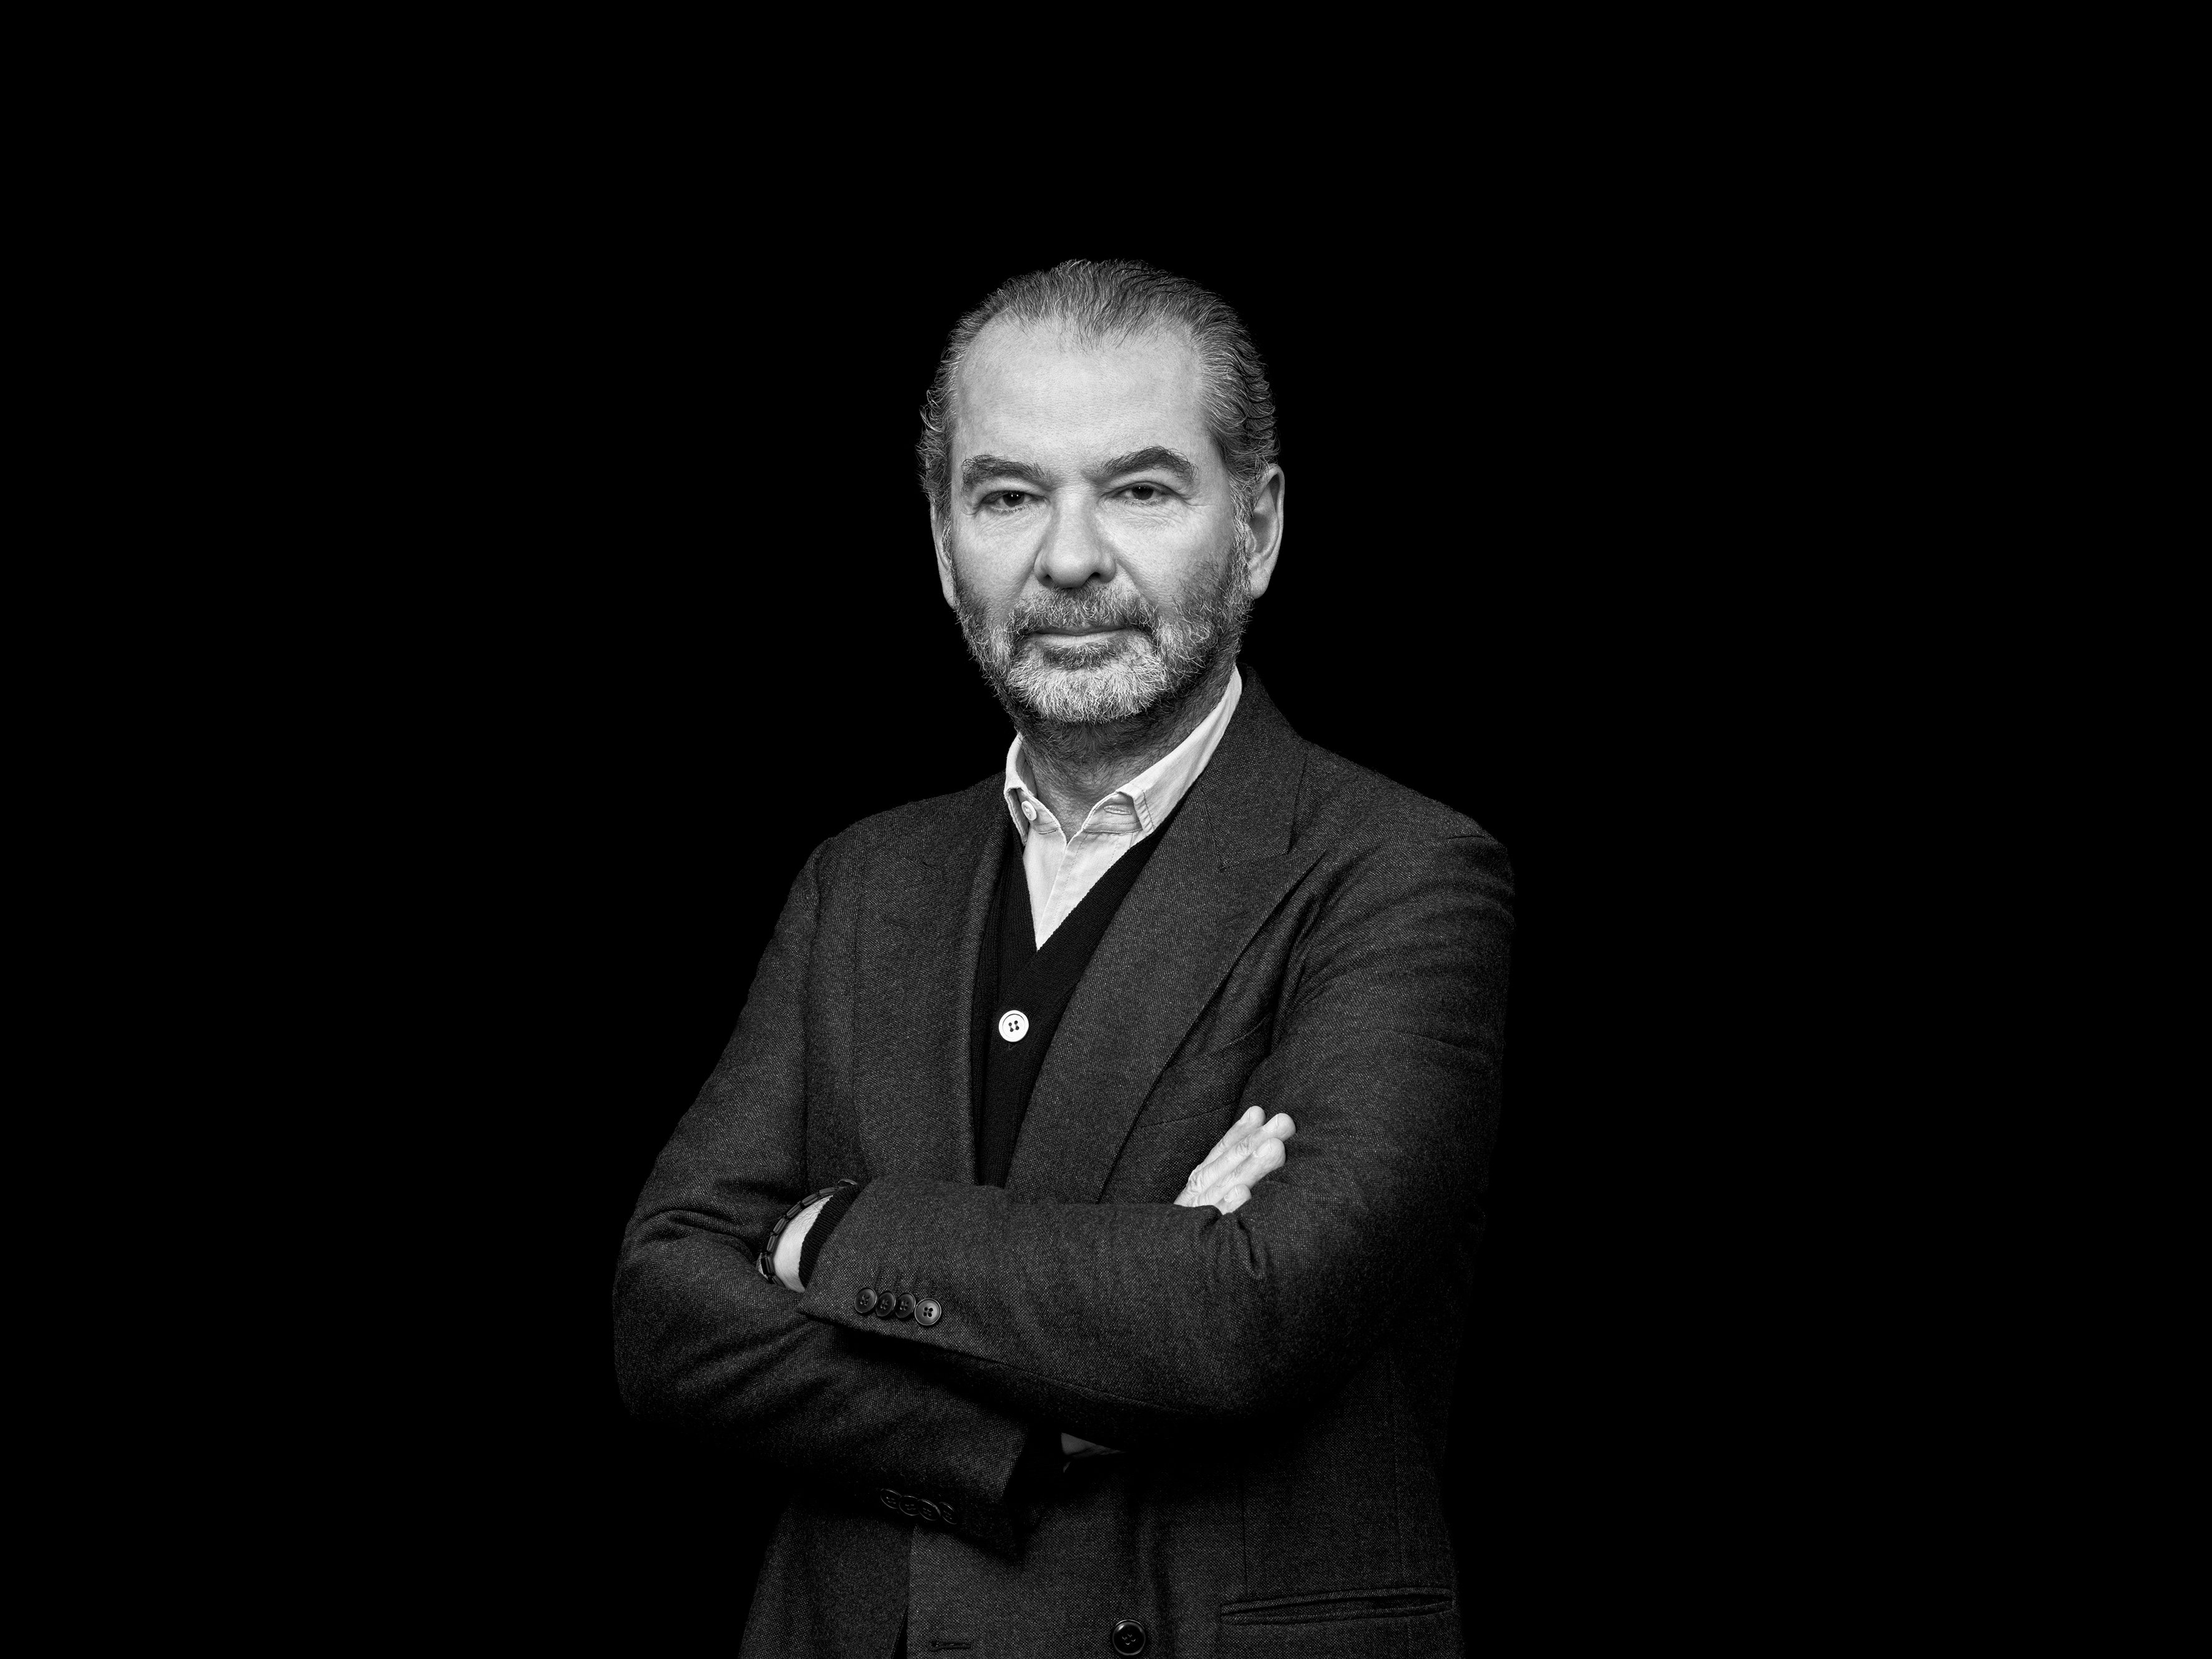 “The Hackathon is an excellent example of our digital focus and demonstrates that collaboration and exchange between different experiences and perspectives can produce great ideas.” —Remo Ruffini, Chairman and CEO of Moncler. Photo: Courtesy of Moncler